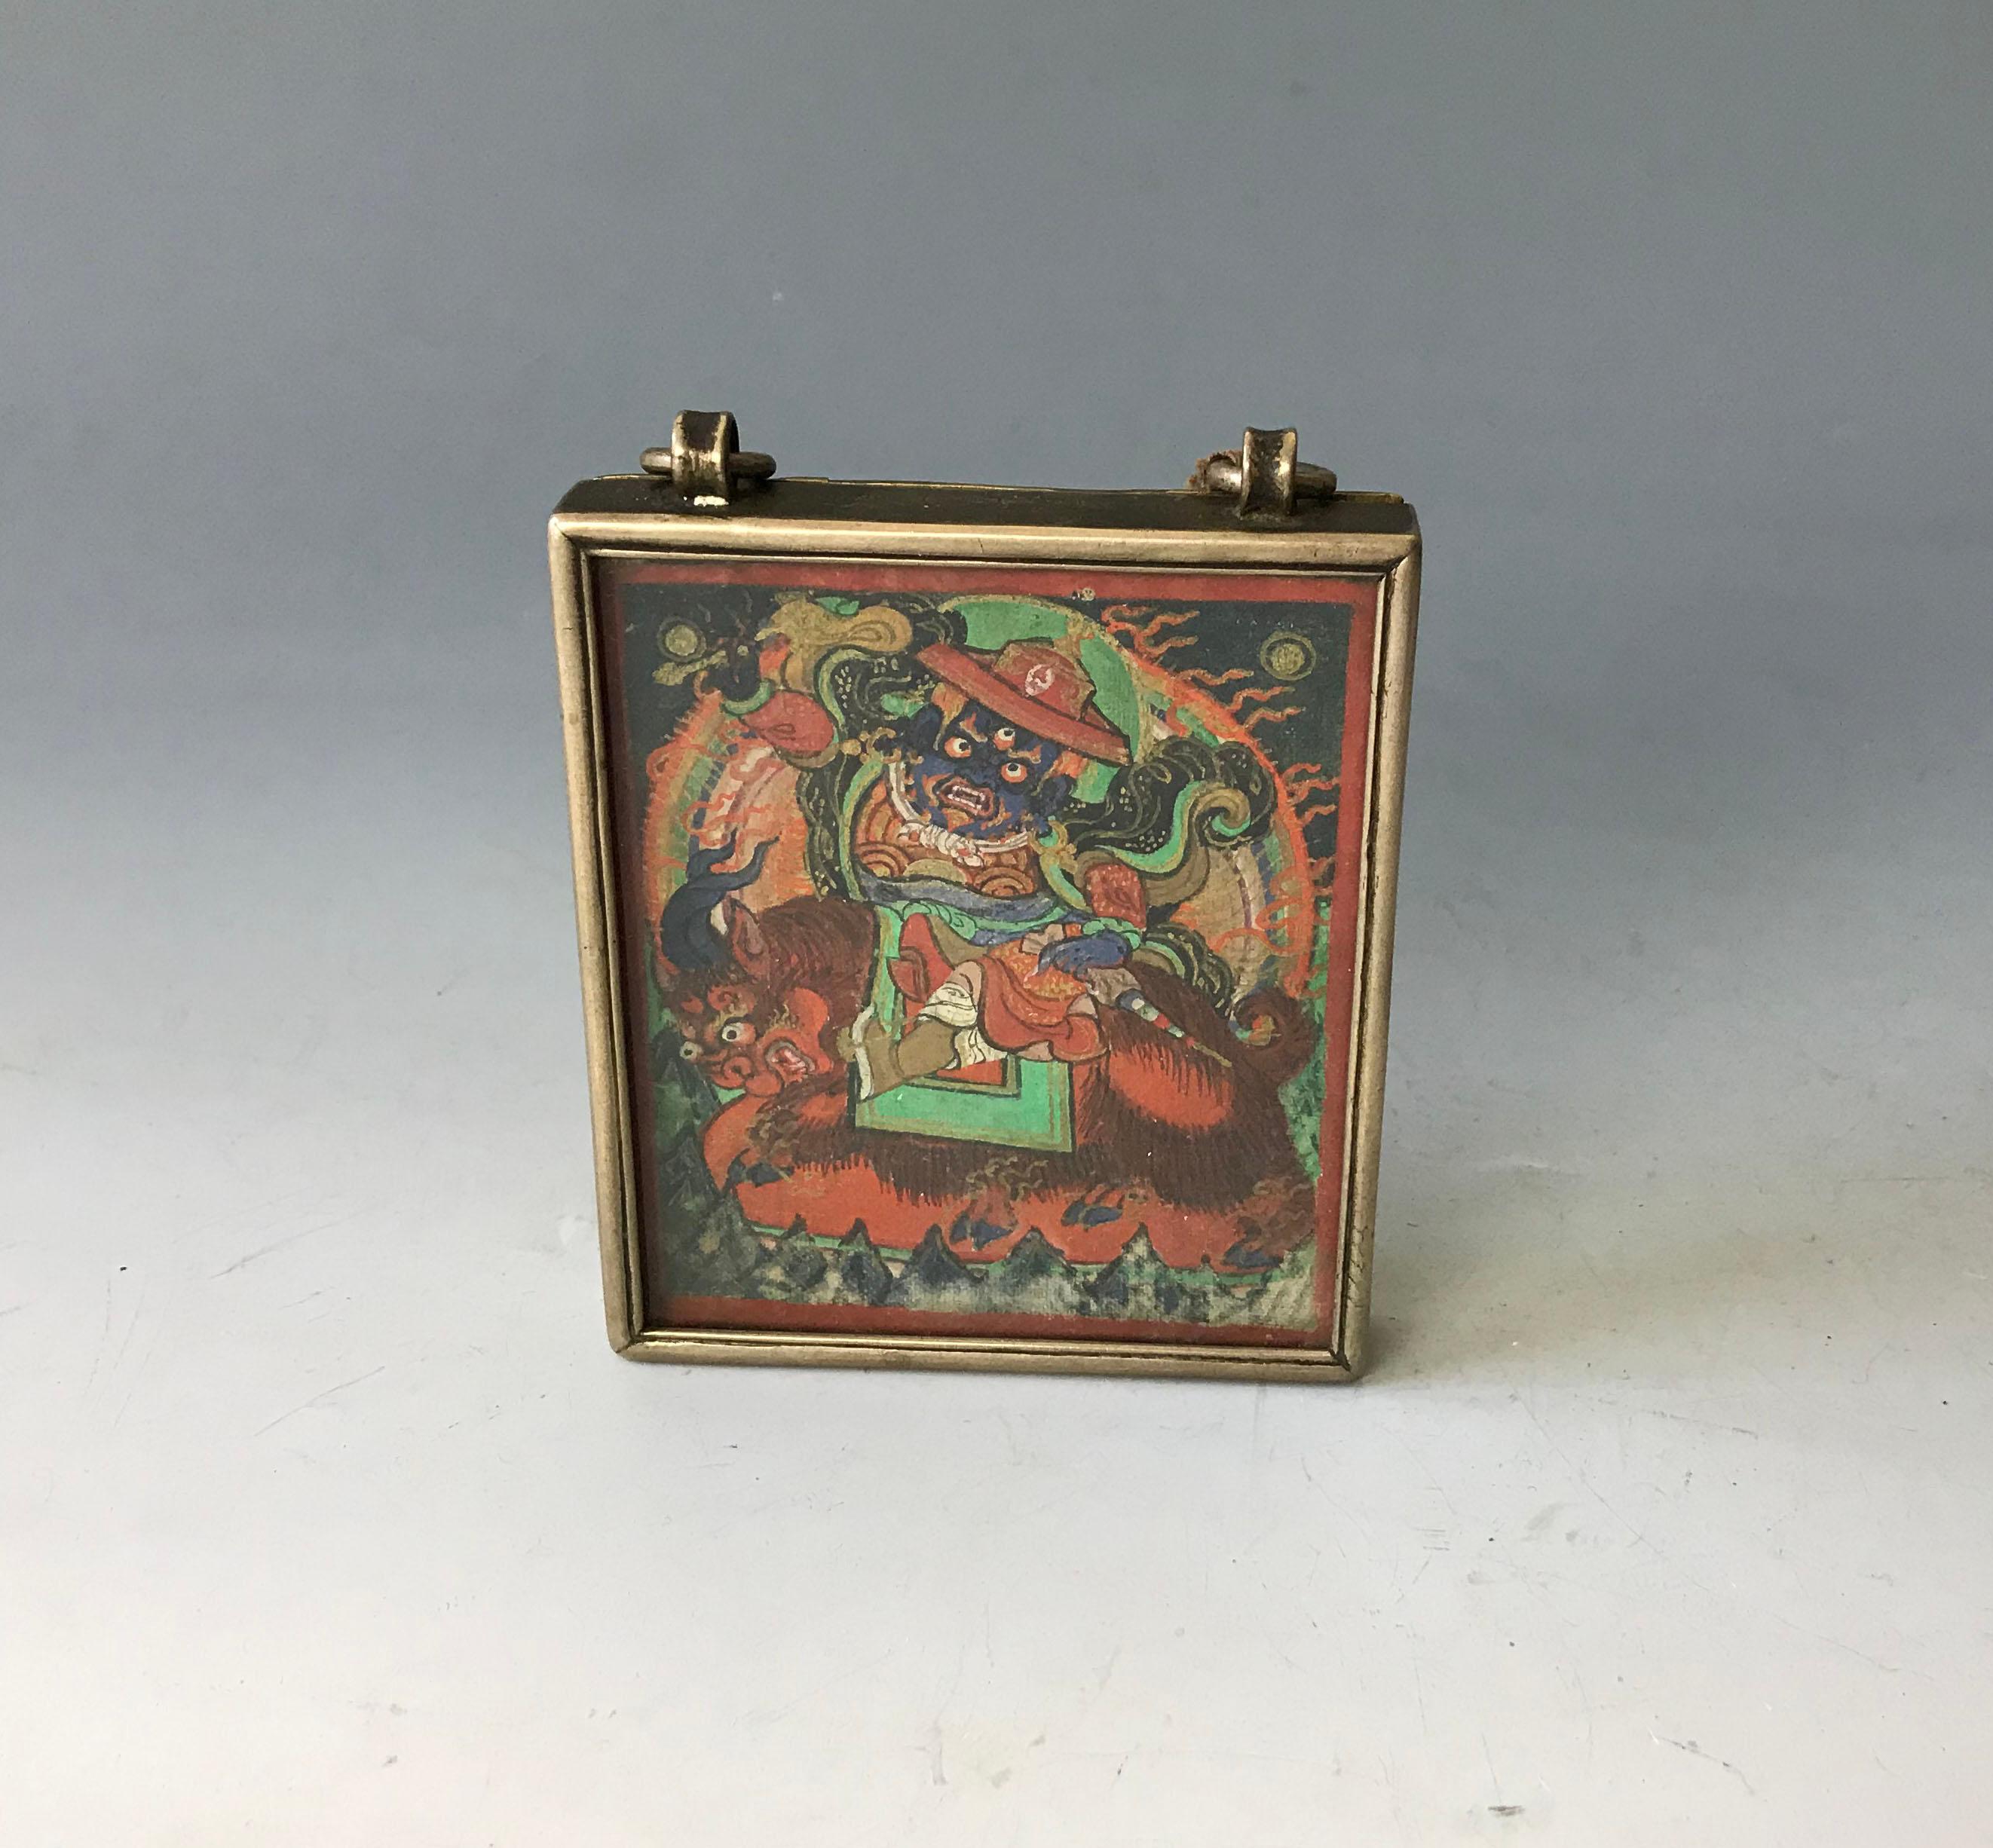 Antique Mongolian Gau box
Central painted deity under glass with silver alloy sides engraved with religious script, brass backing with central painting and interior images. The Ga`u Buddhist religious artifact and is used as a small traveling shrine